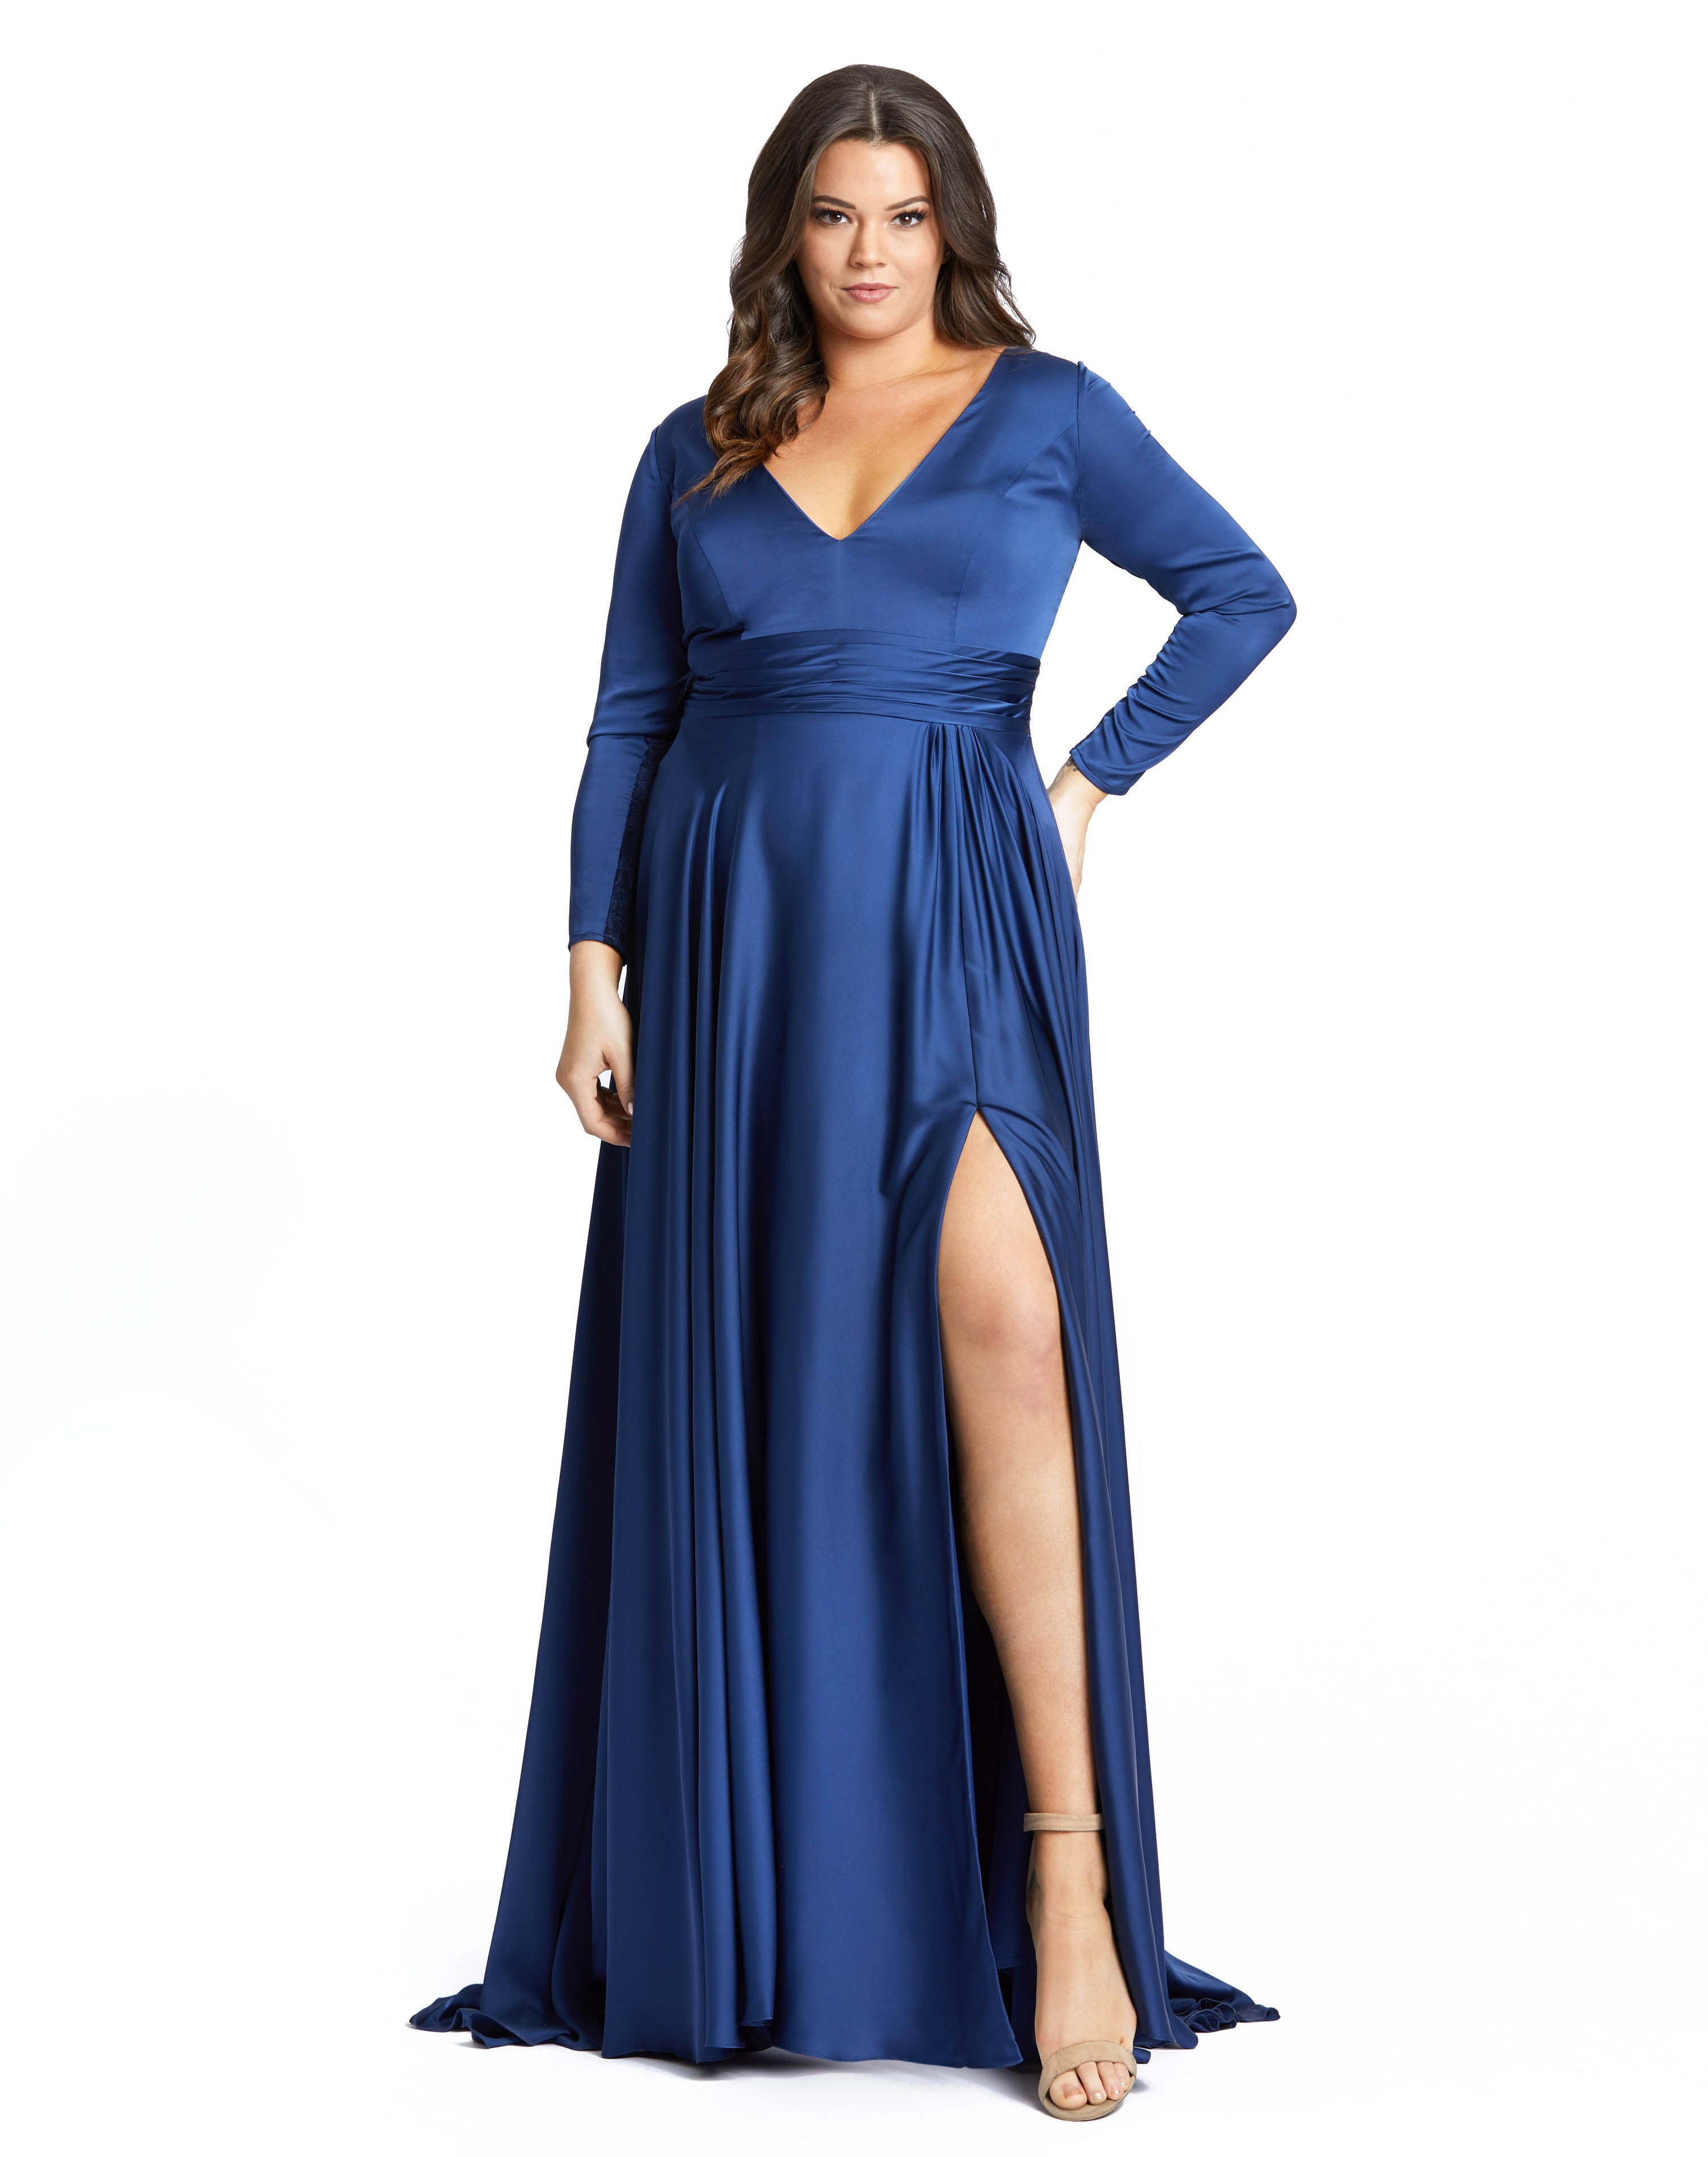 Classic Satin Long Sleeve Evening Gown (Plus)